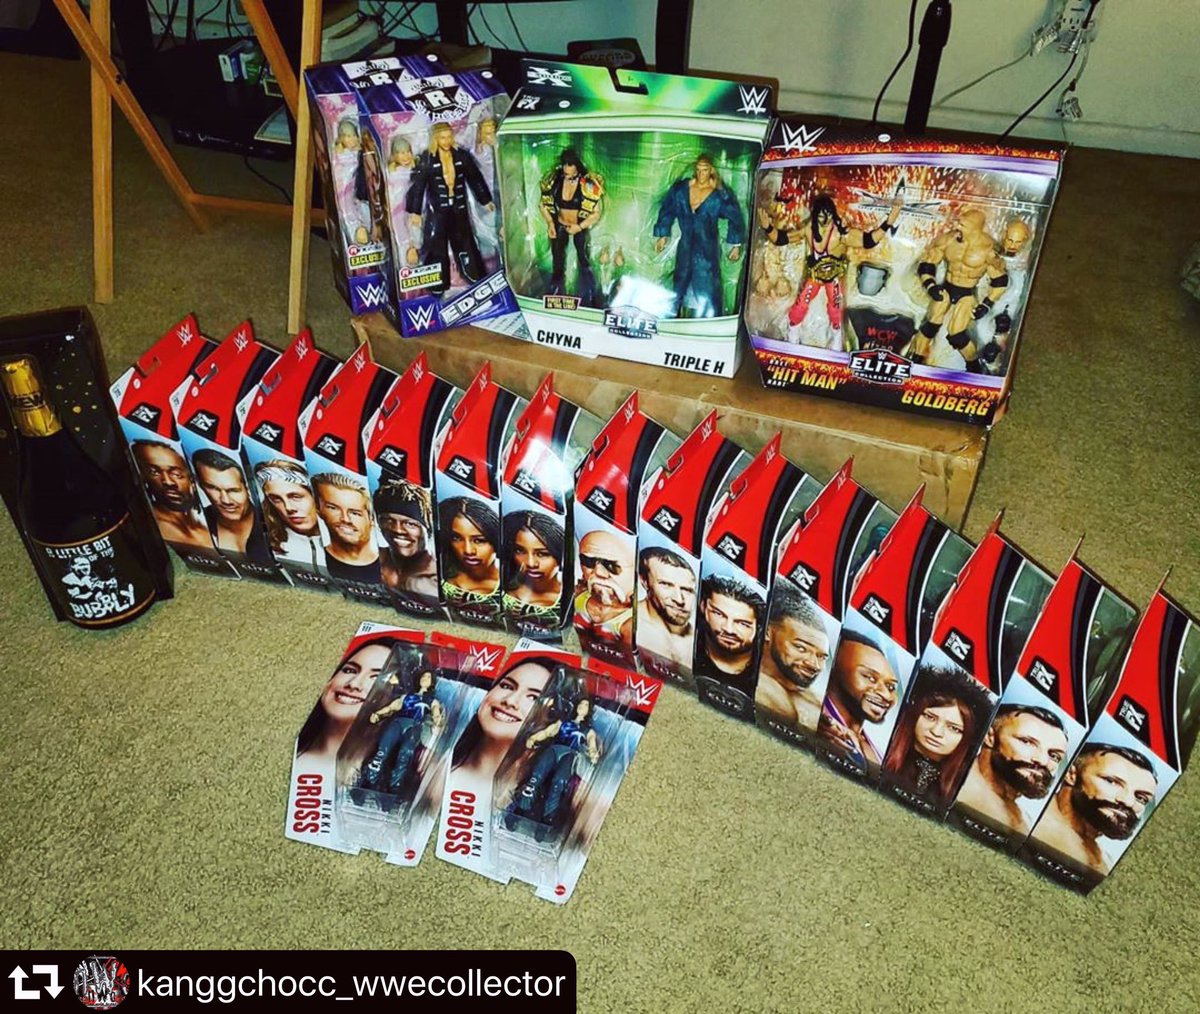 What an incredible mail call! 🤩
Which is your favorite figure?

📷 @kanggchocc_wwecollector on IG

Shop these figures now at WrestlingFigures.com!

#RingsideCollectibles #WrestlingFigures #WWEEliteSquad #Mattel #WWE #AEW #RingsideExclusive #AllEliteWrestling #Raw #SDLive